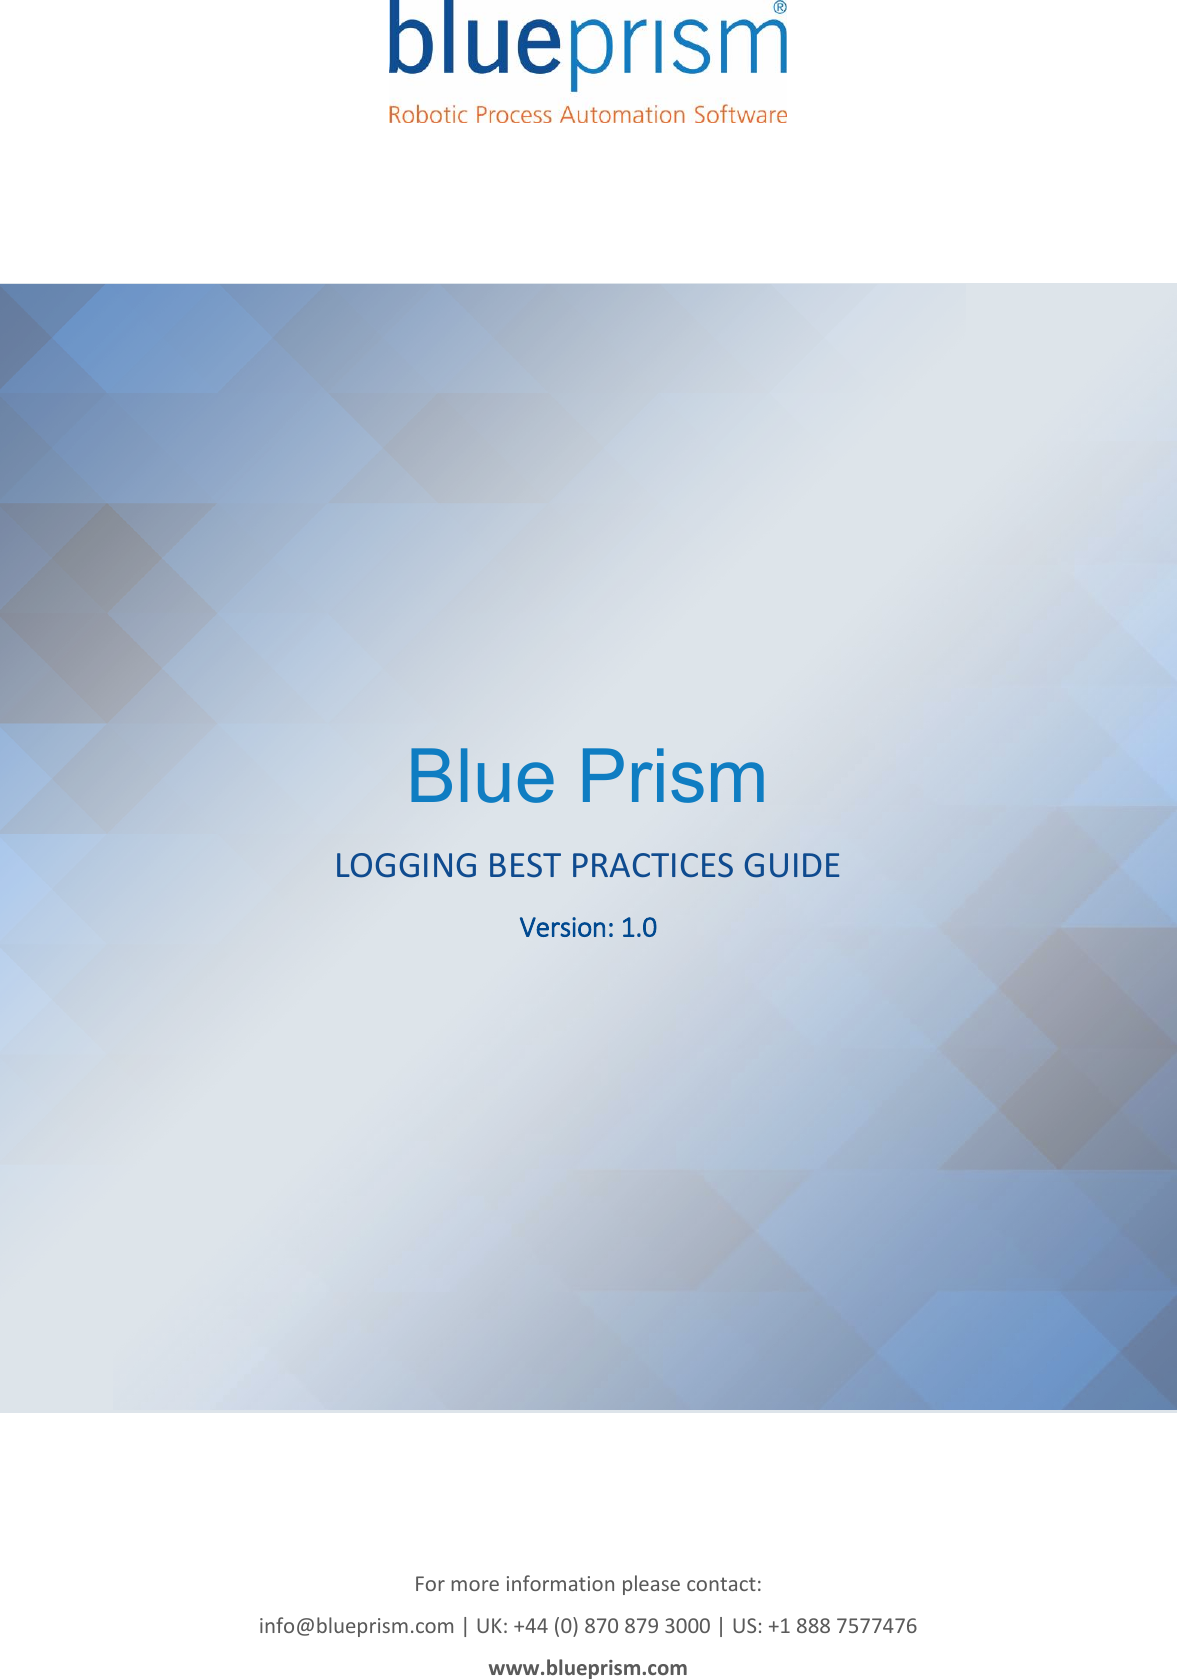 Page 1 of 12 - Blue Prism Logging Best Practices Guide